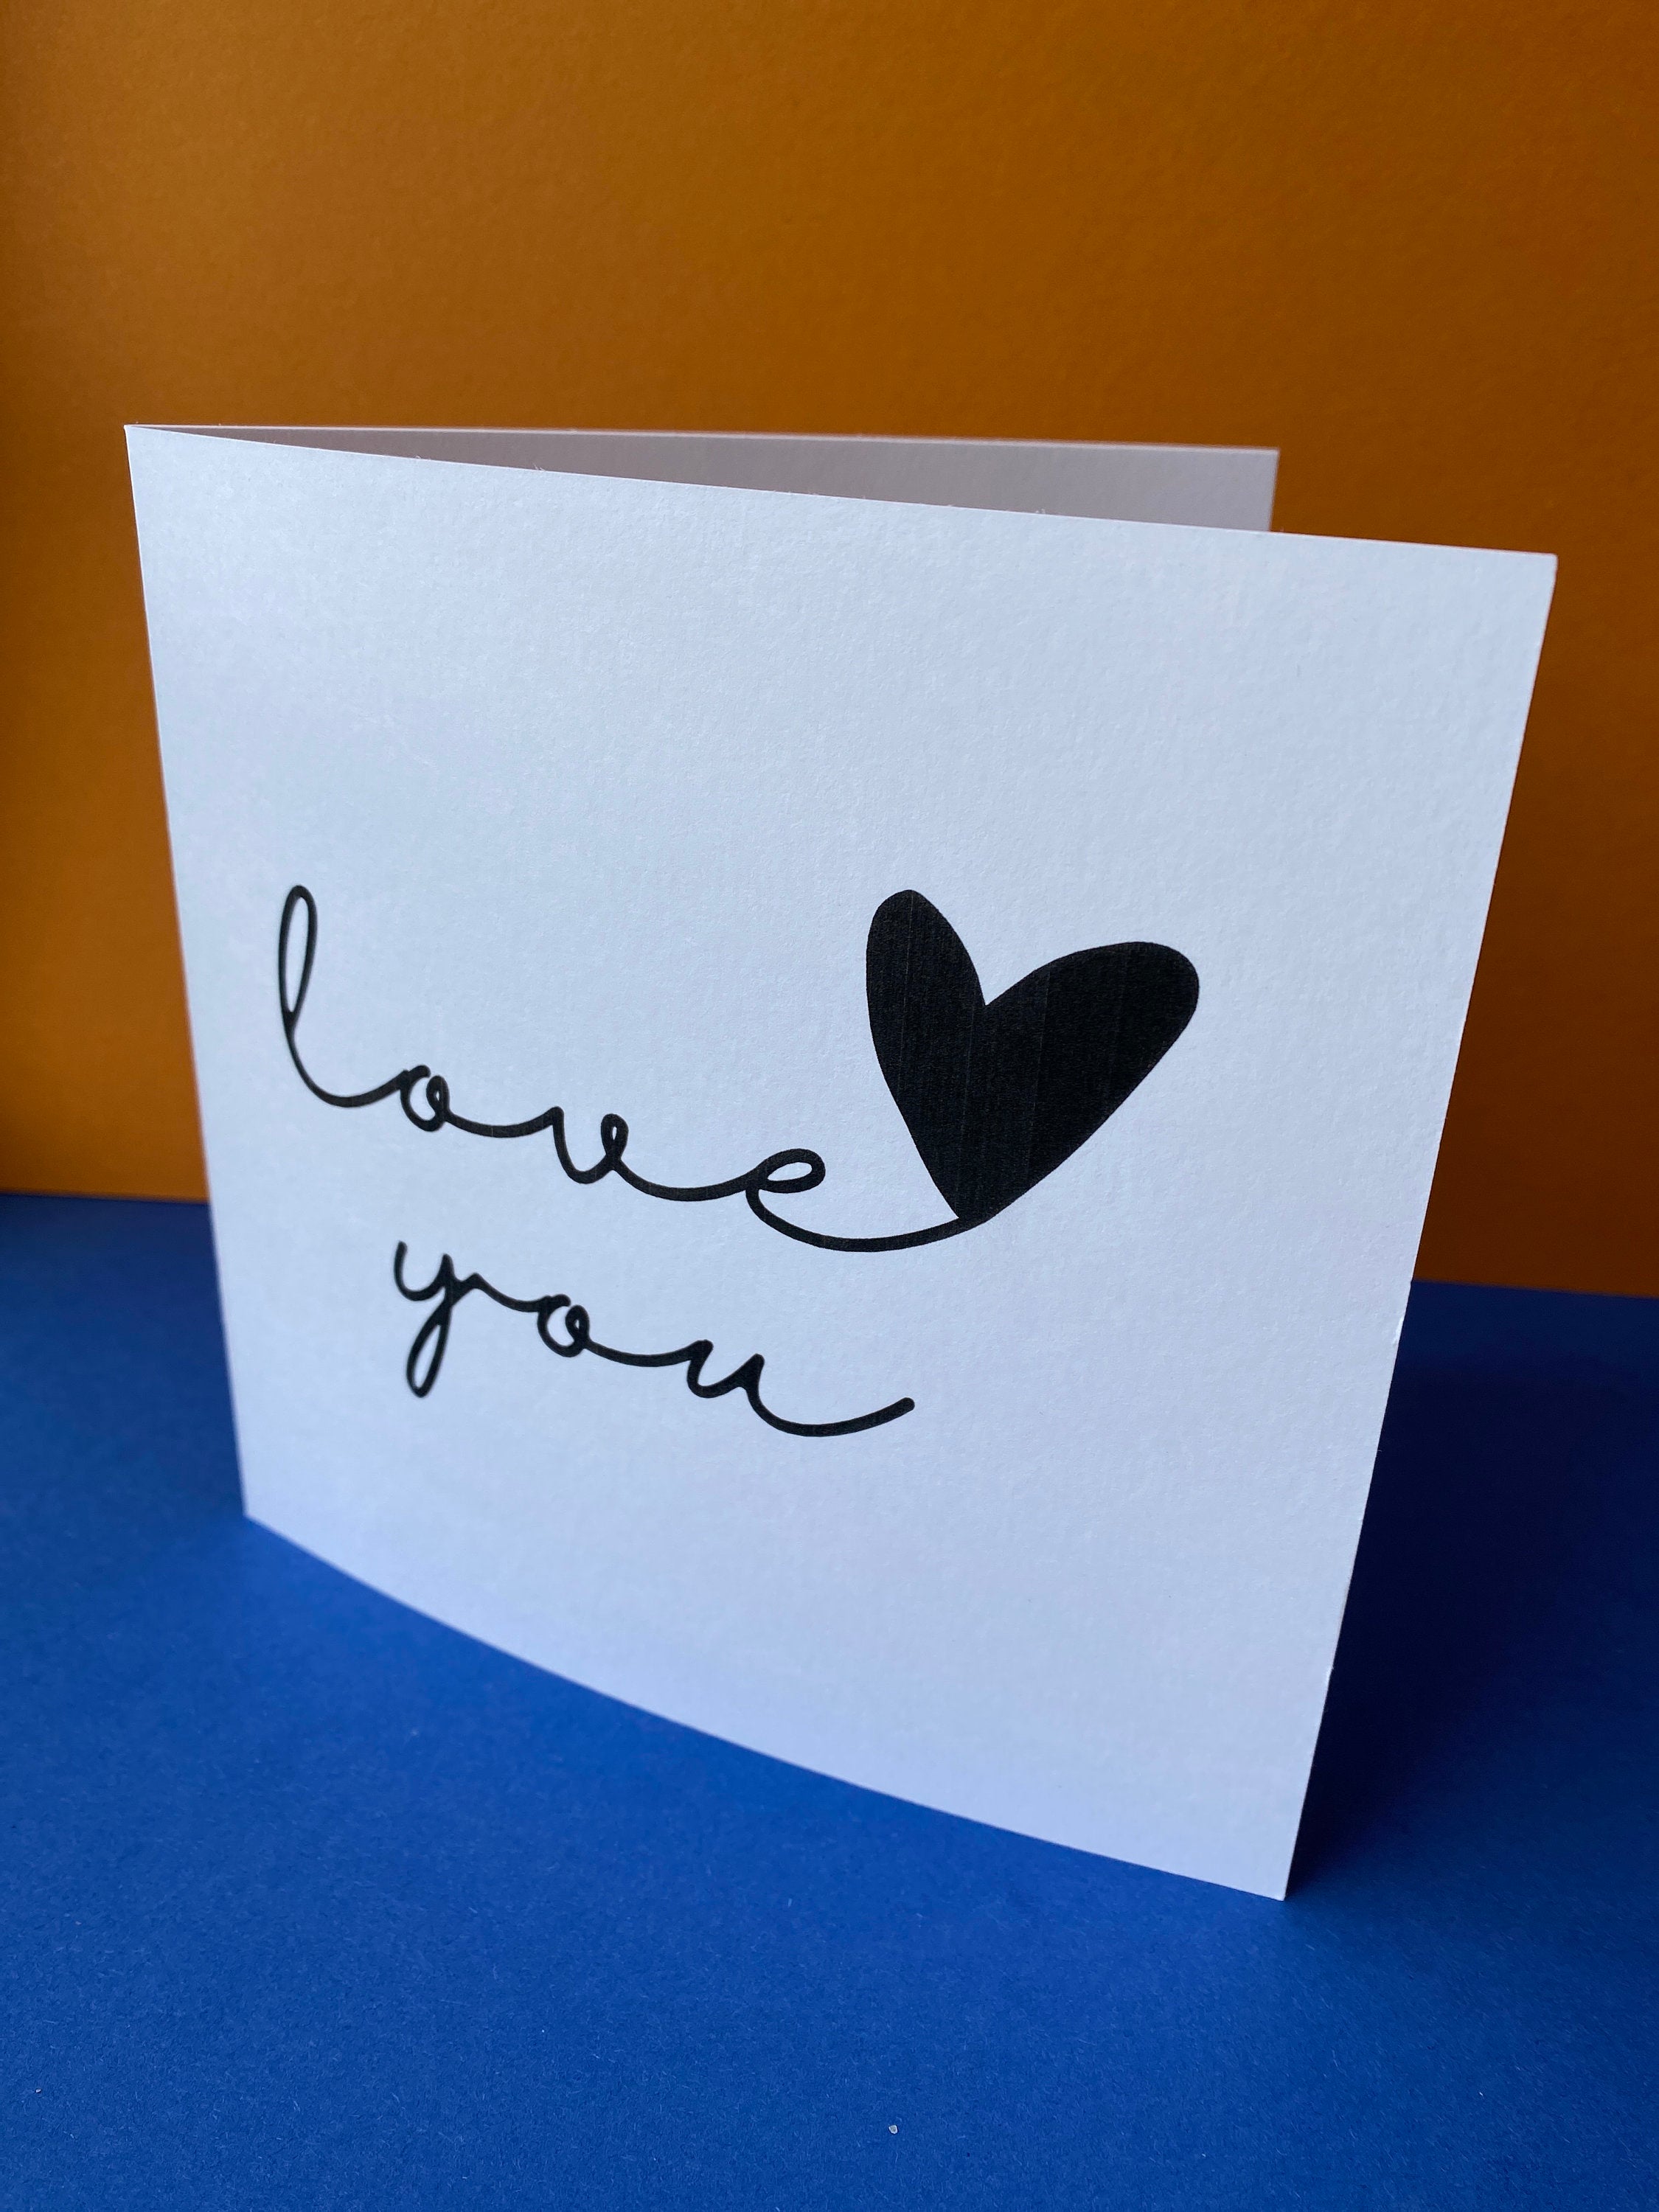 Valentines Card “Love You”